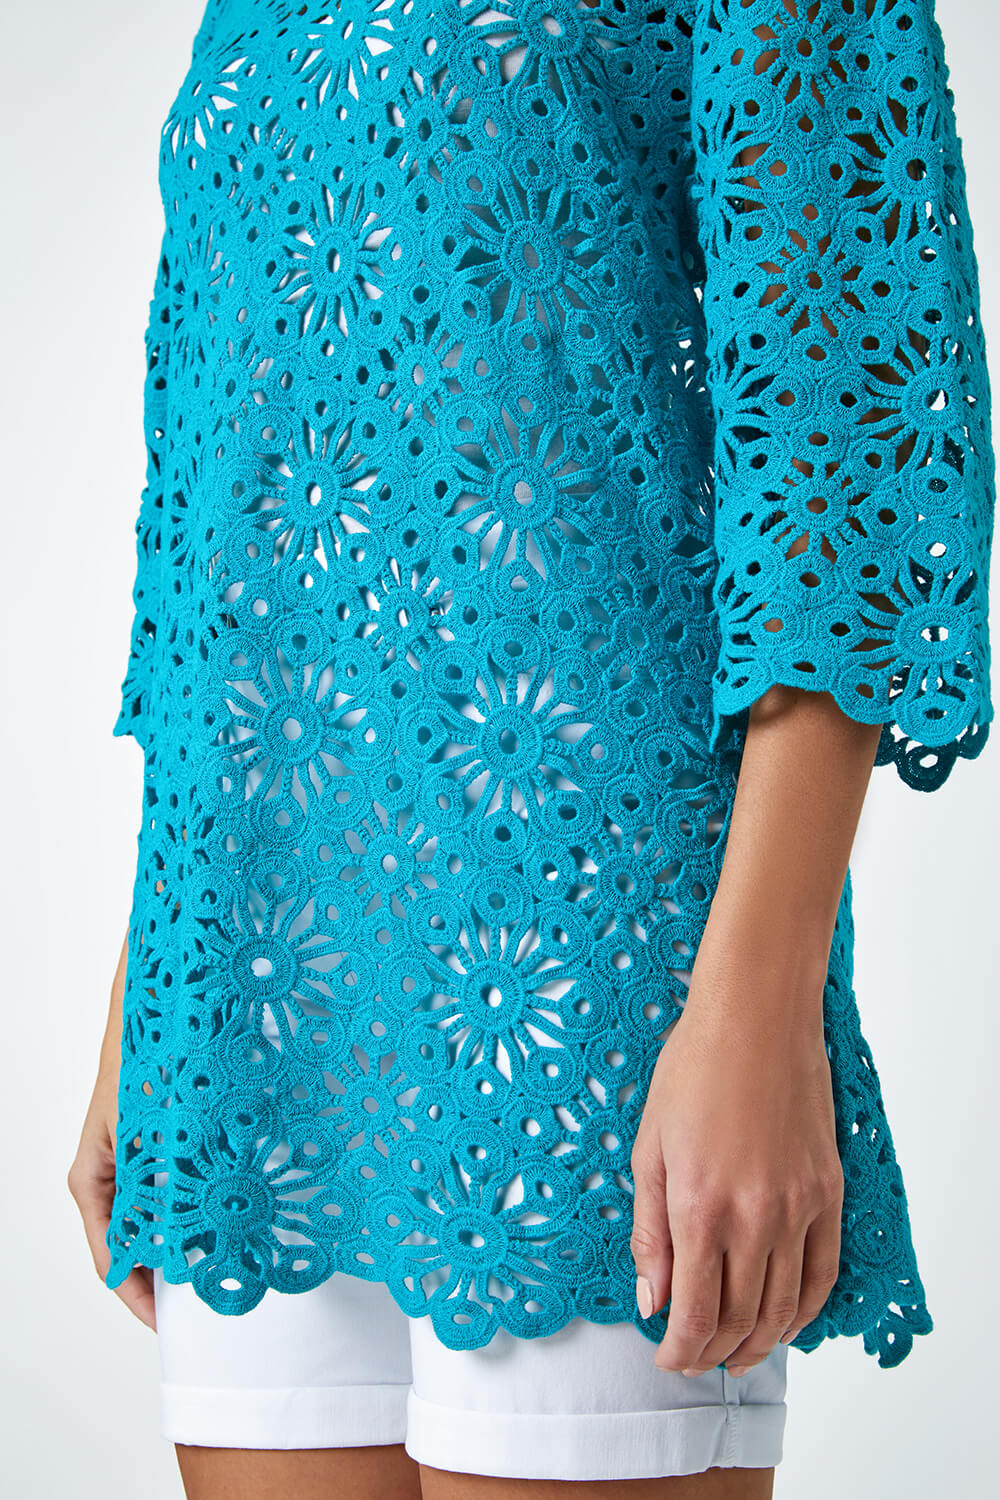 Turquoise Floral Cotton Crochet Top, Image 5 of 5